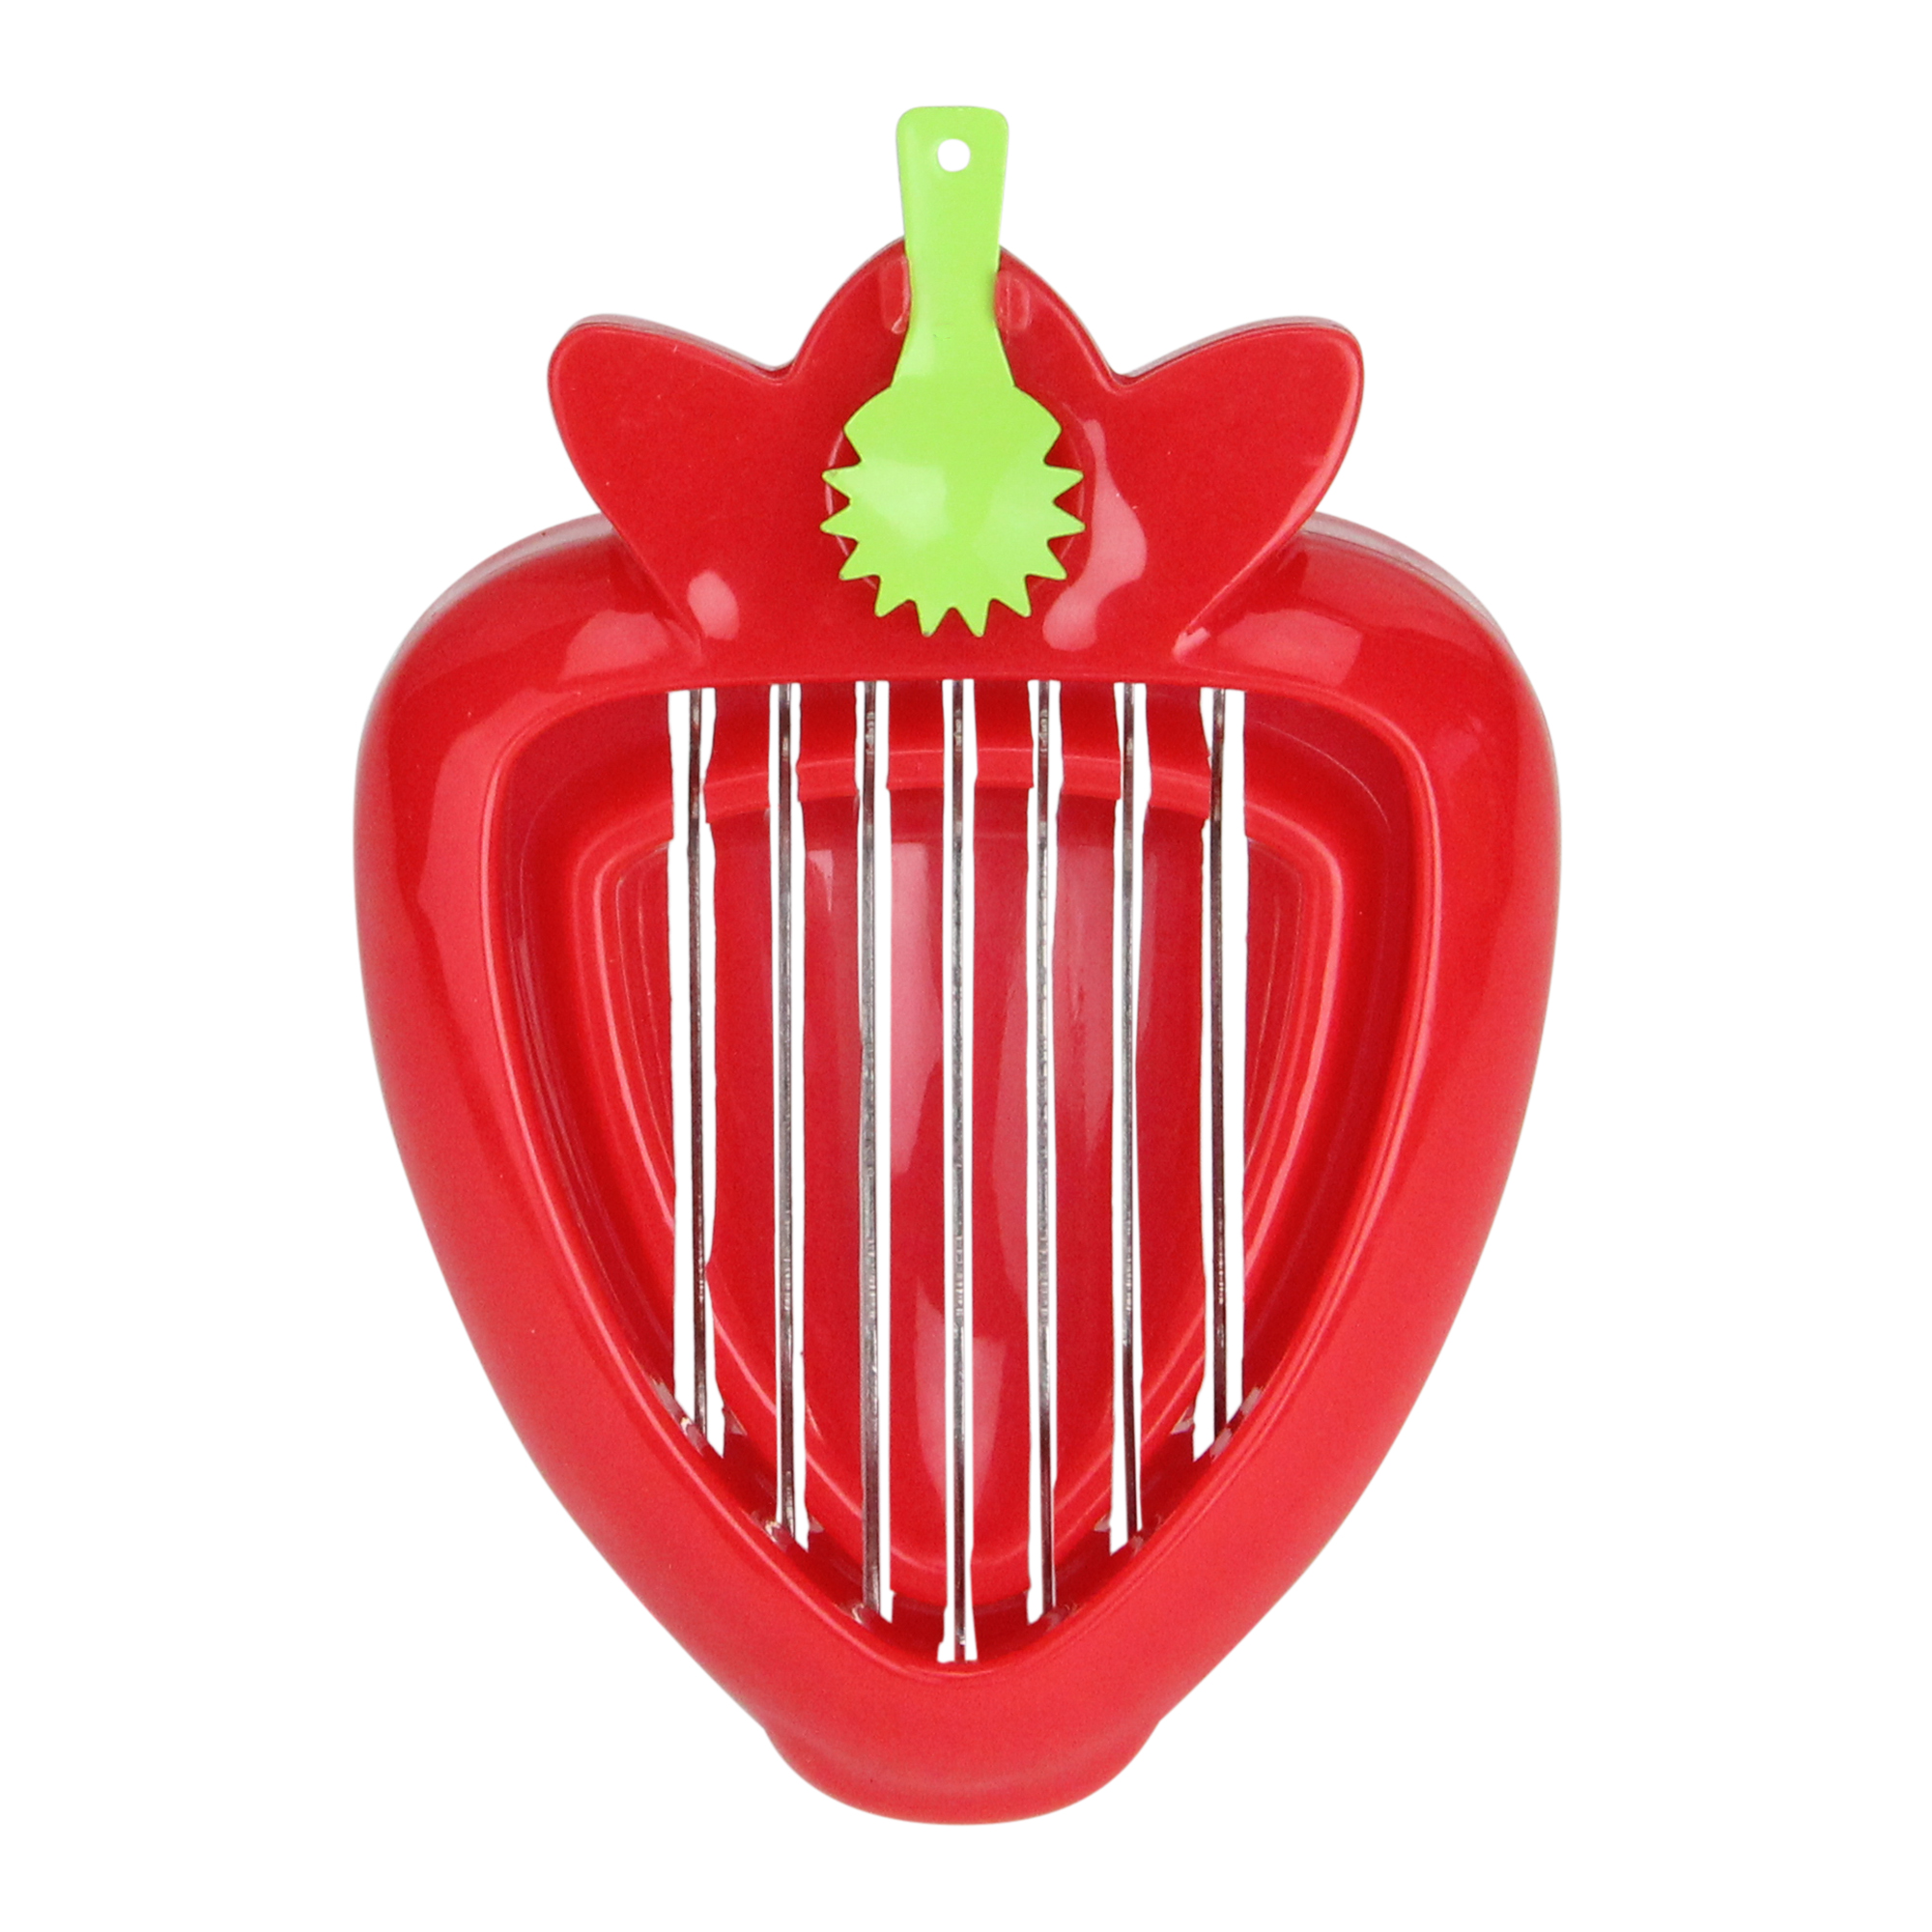 4" Red and Silver Strawberry Slicer with a Lime Green Huller - image 2 of 2